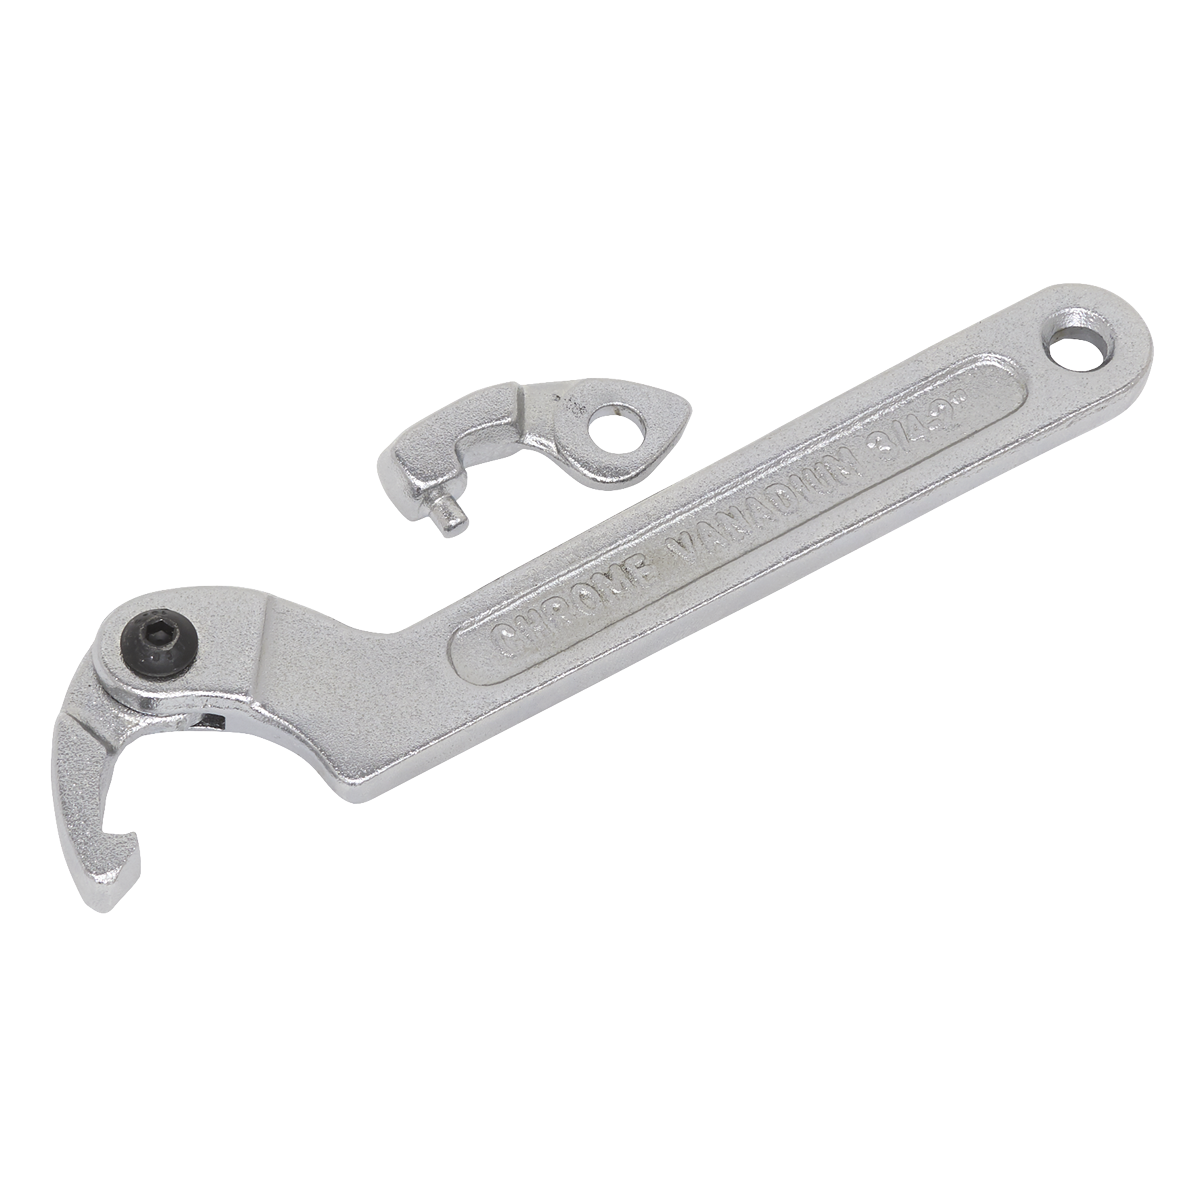 Adjustable C Spanner - Hook & Pin Wrench Set 3pc 19-51mm